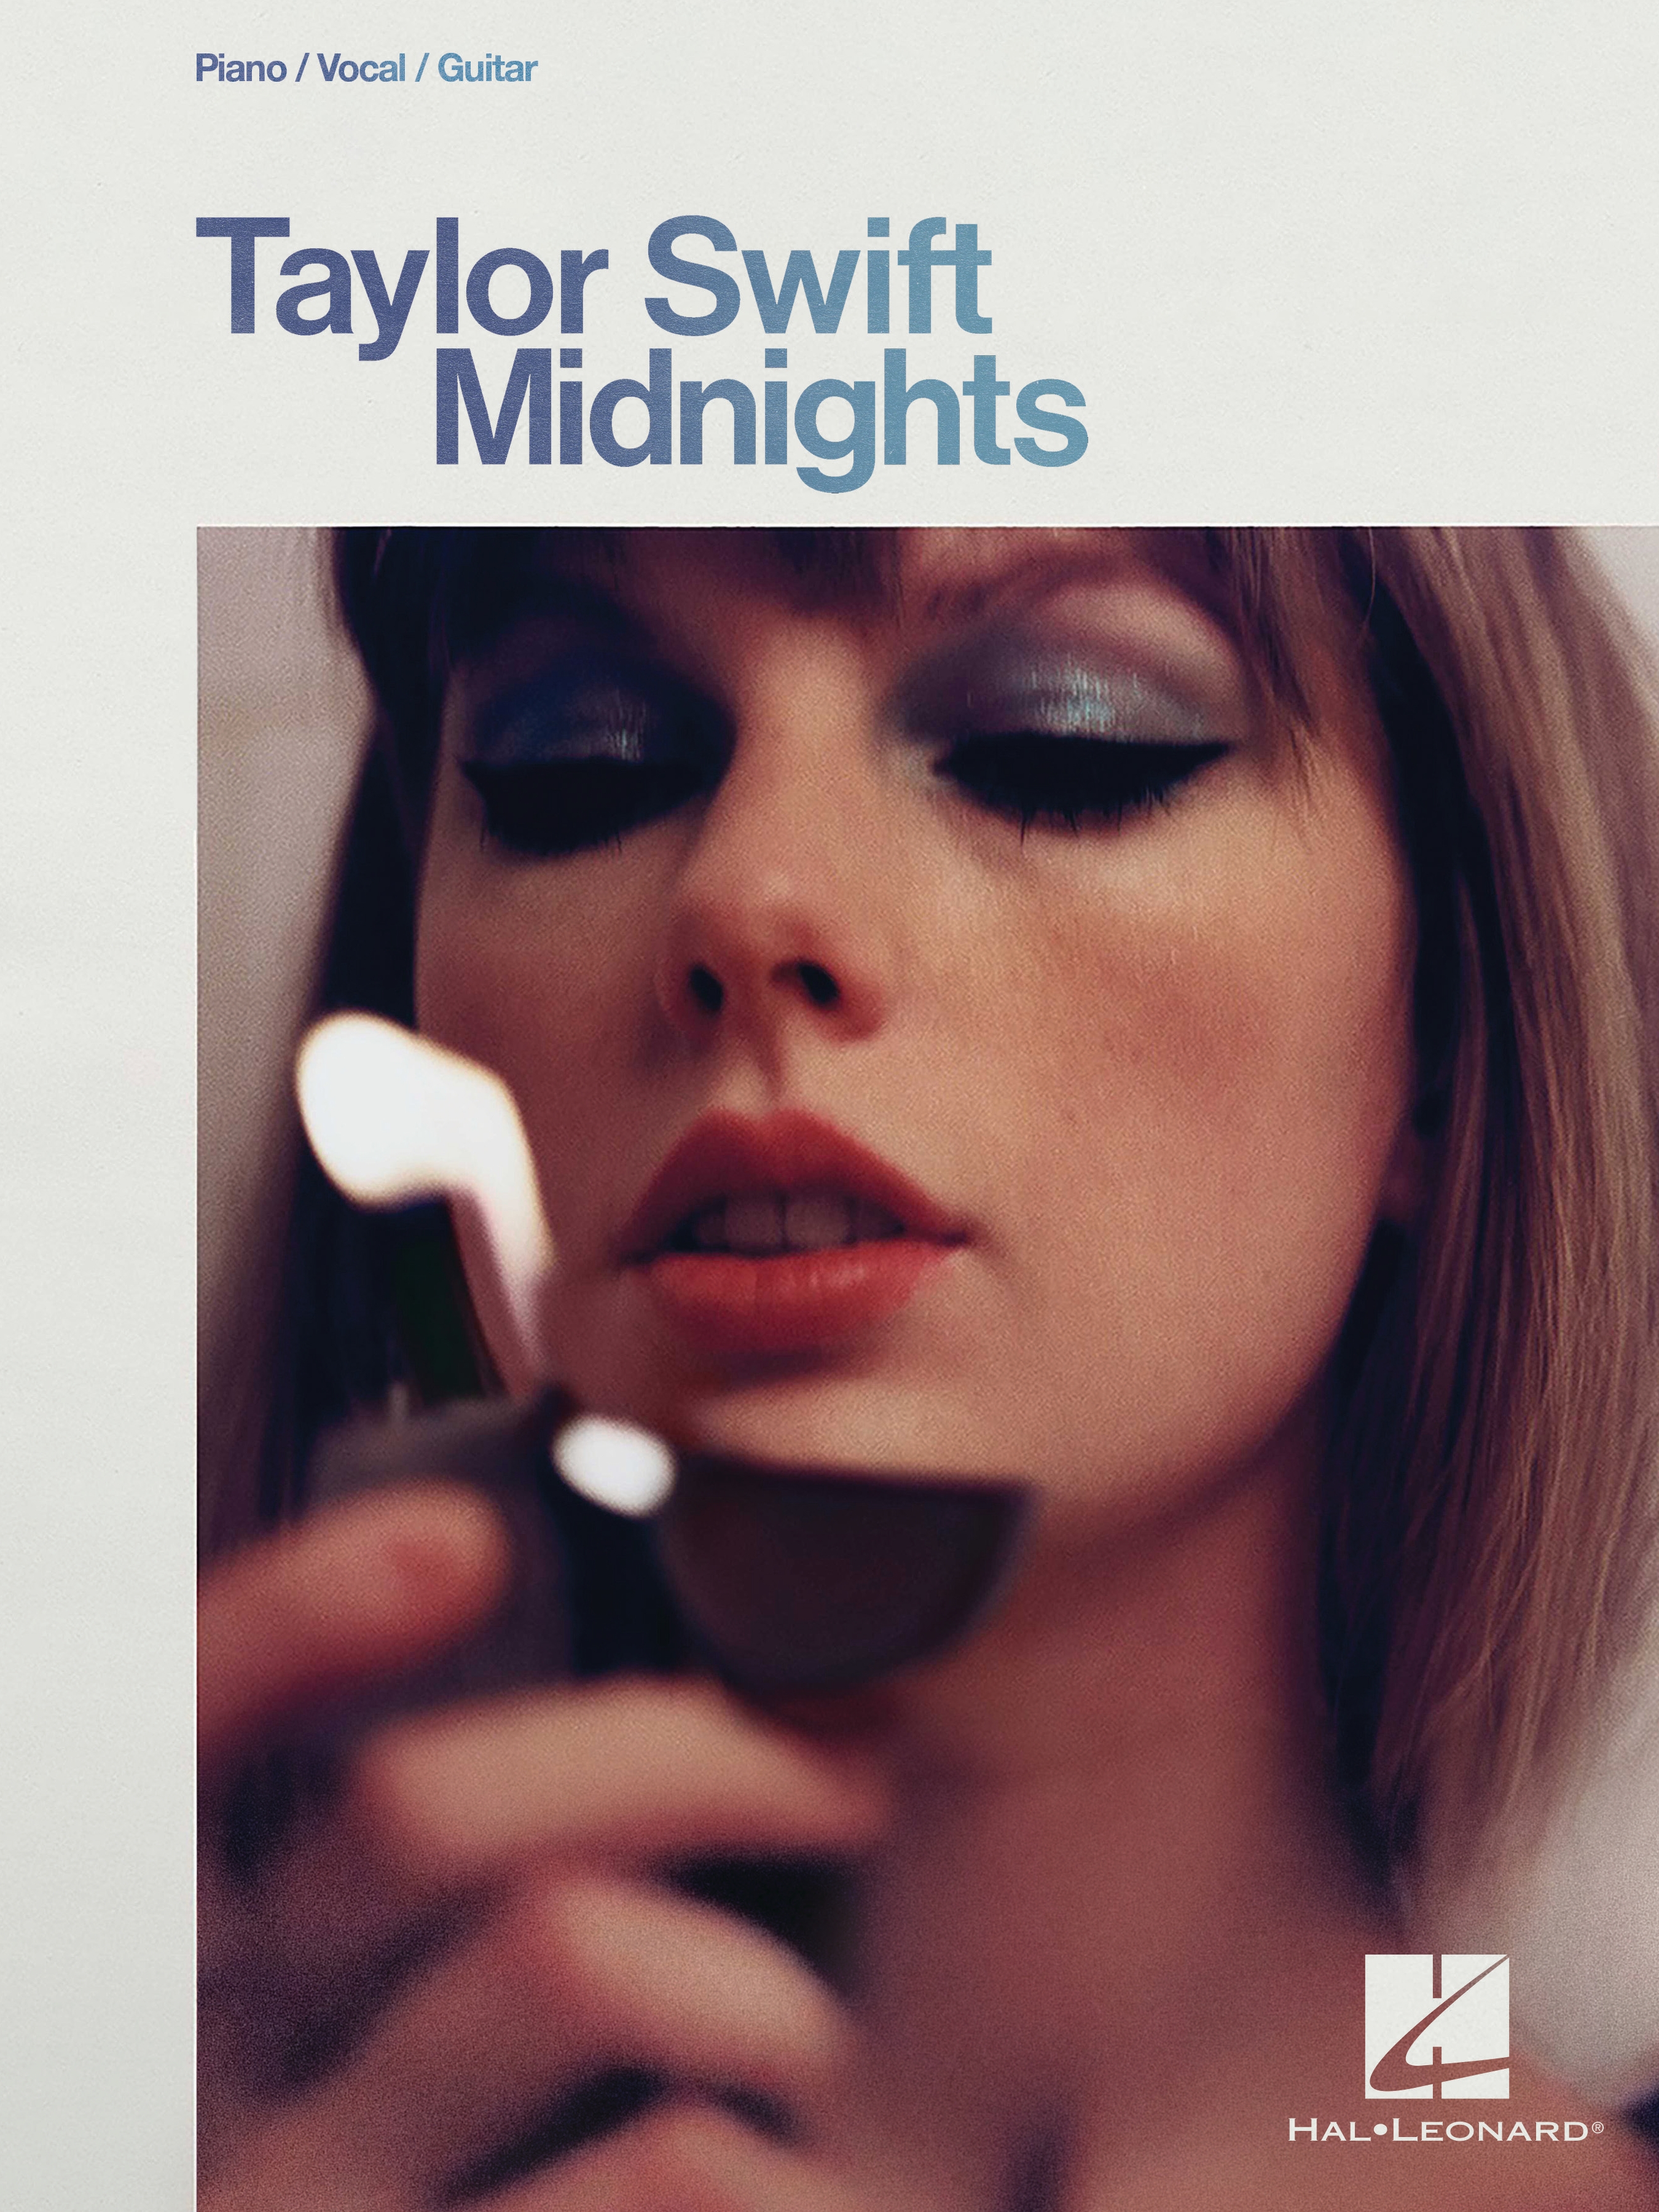 Midnights guitar sheet music cover